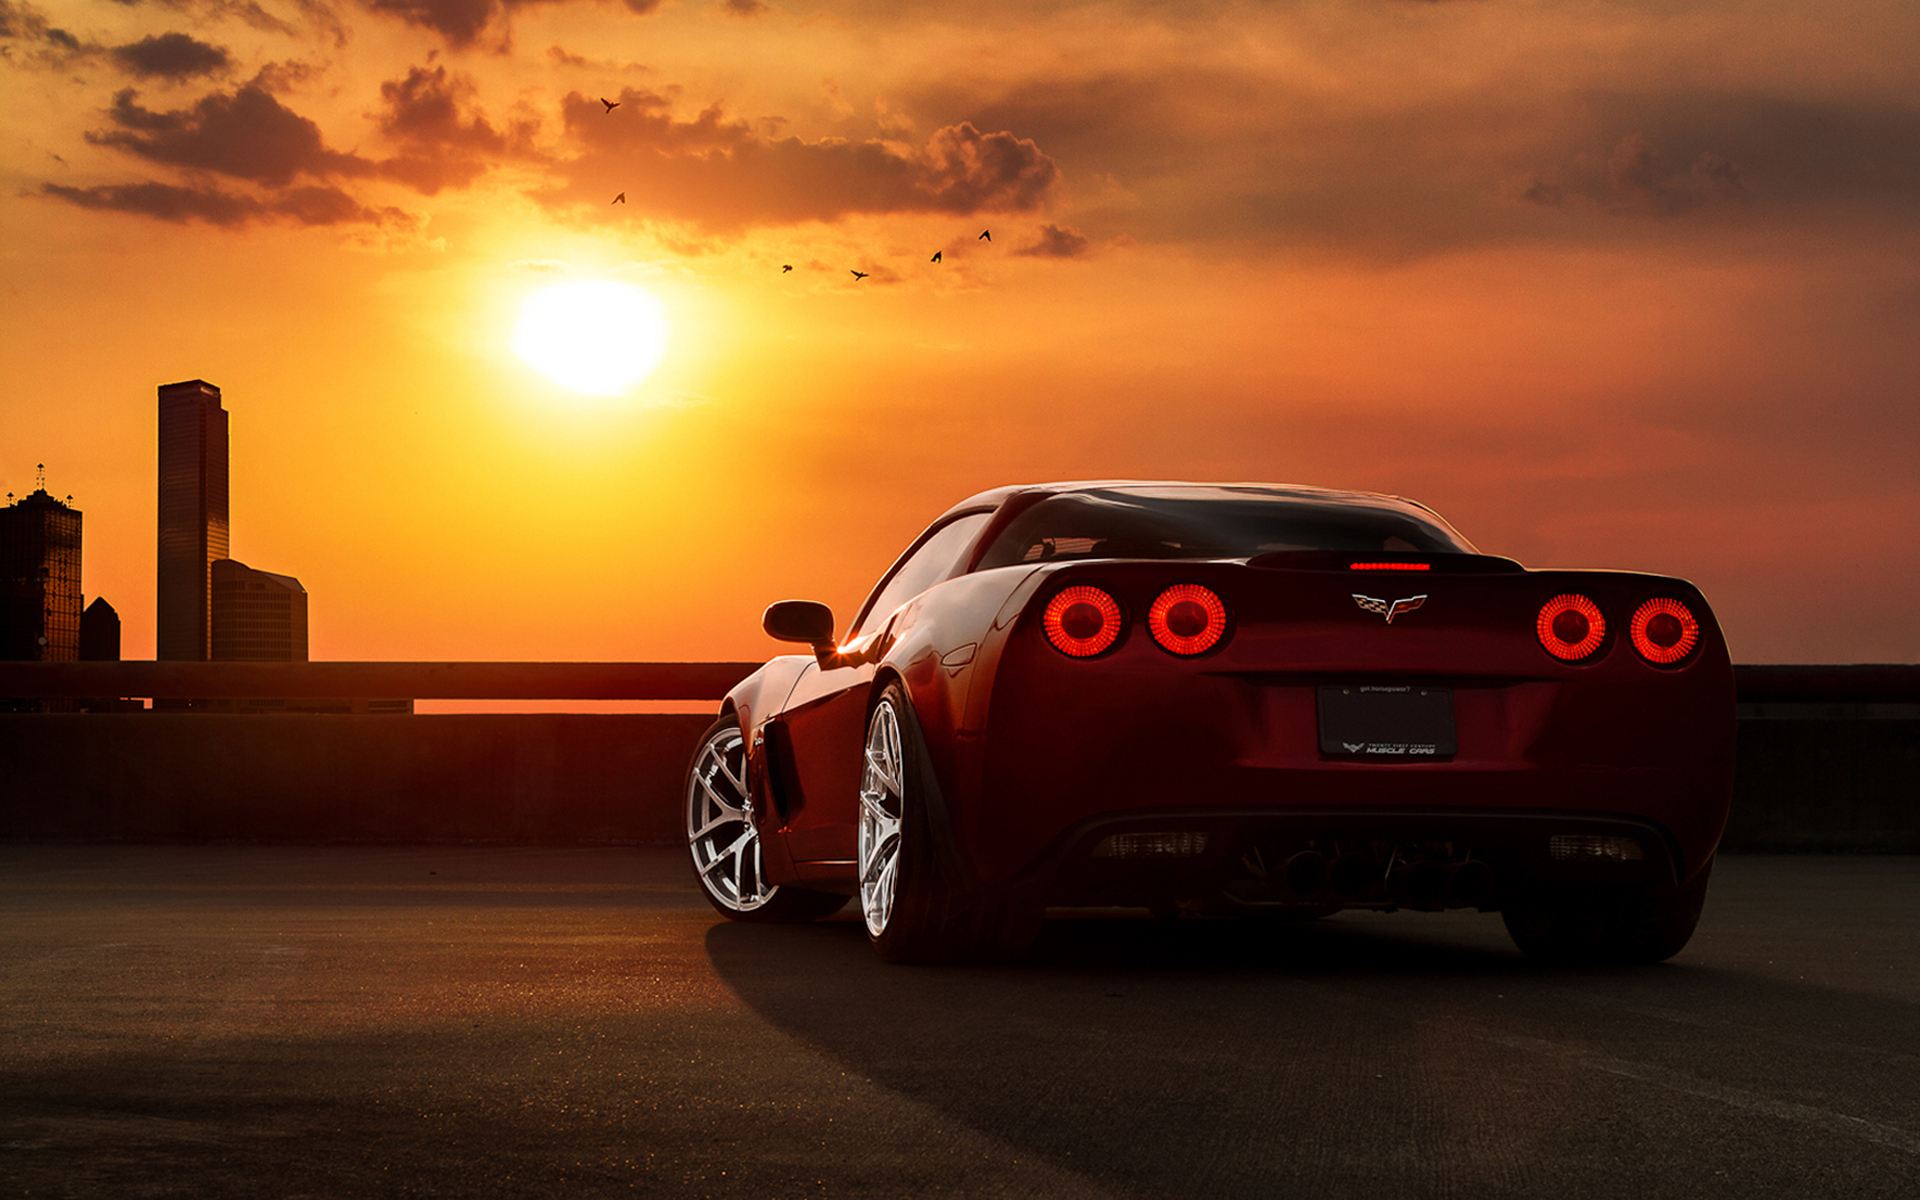 Free Download Corvette New Awesome Hd Desktop Wallpapers All Hd